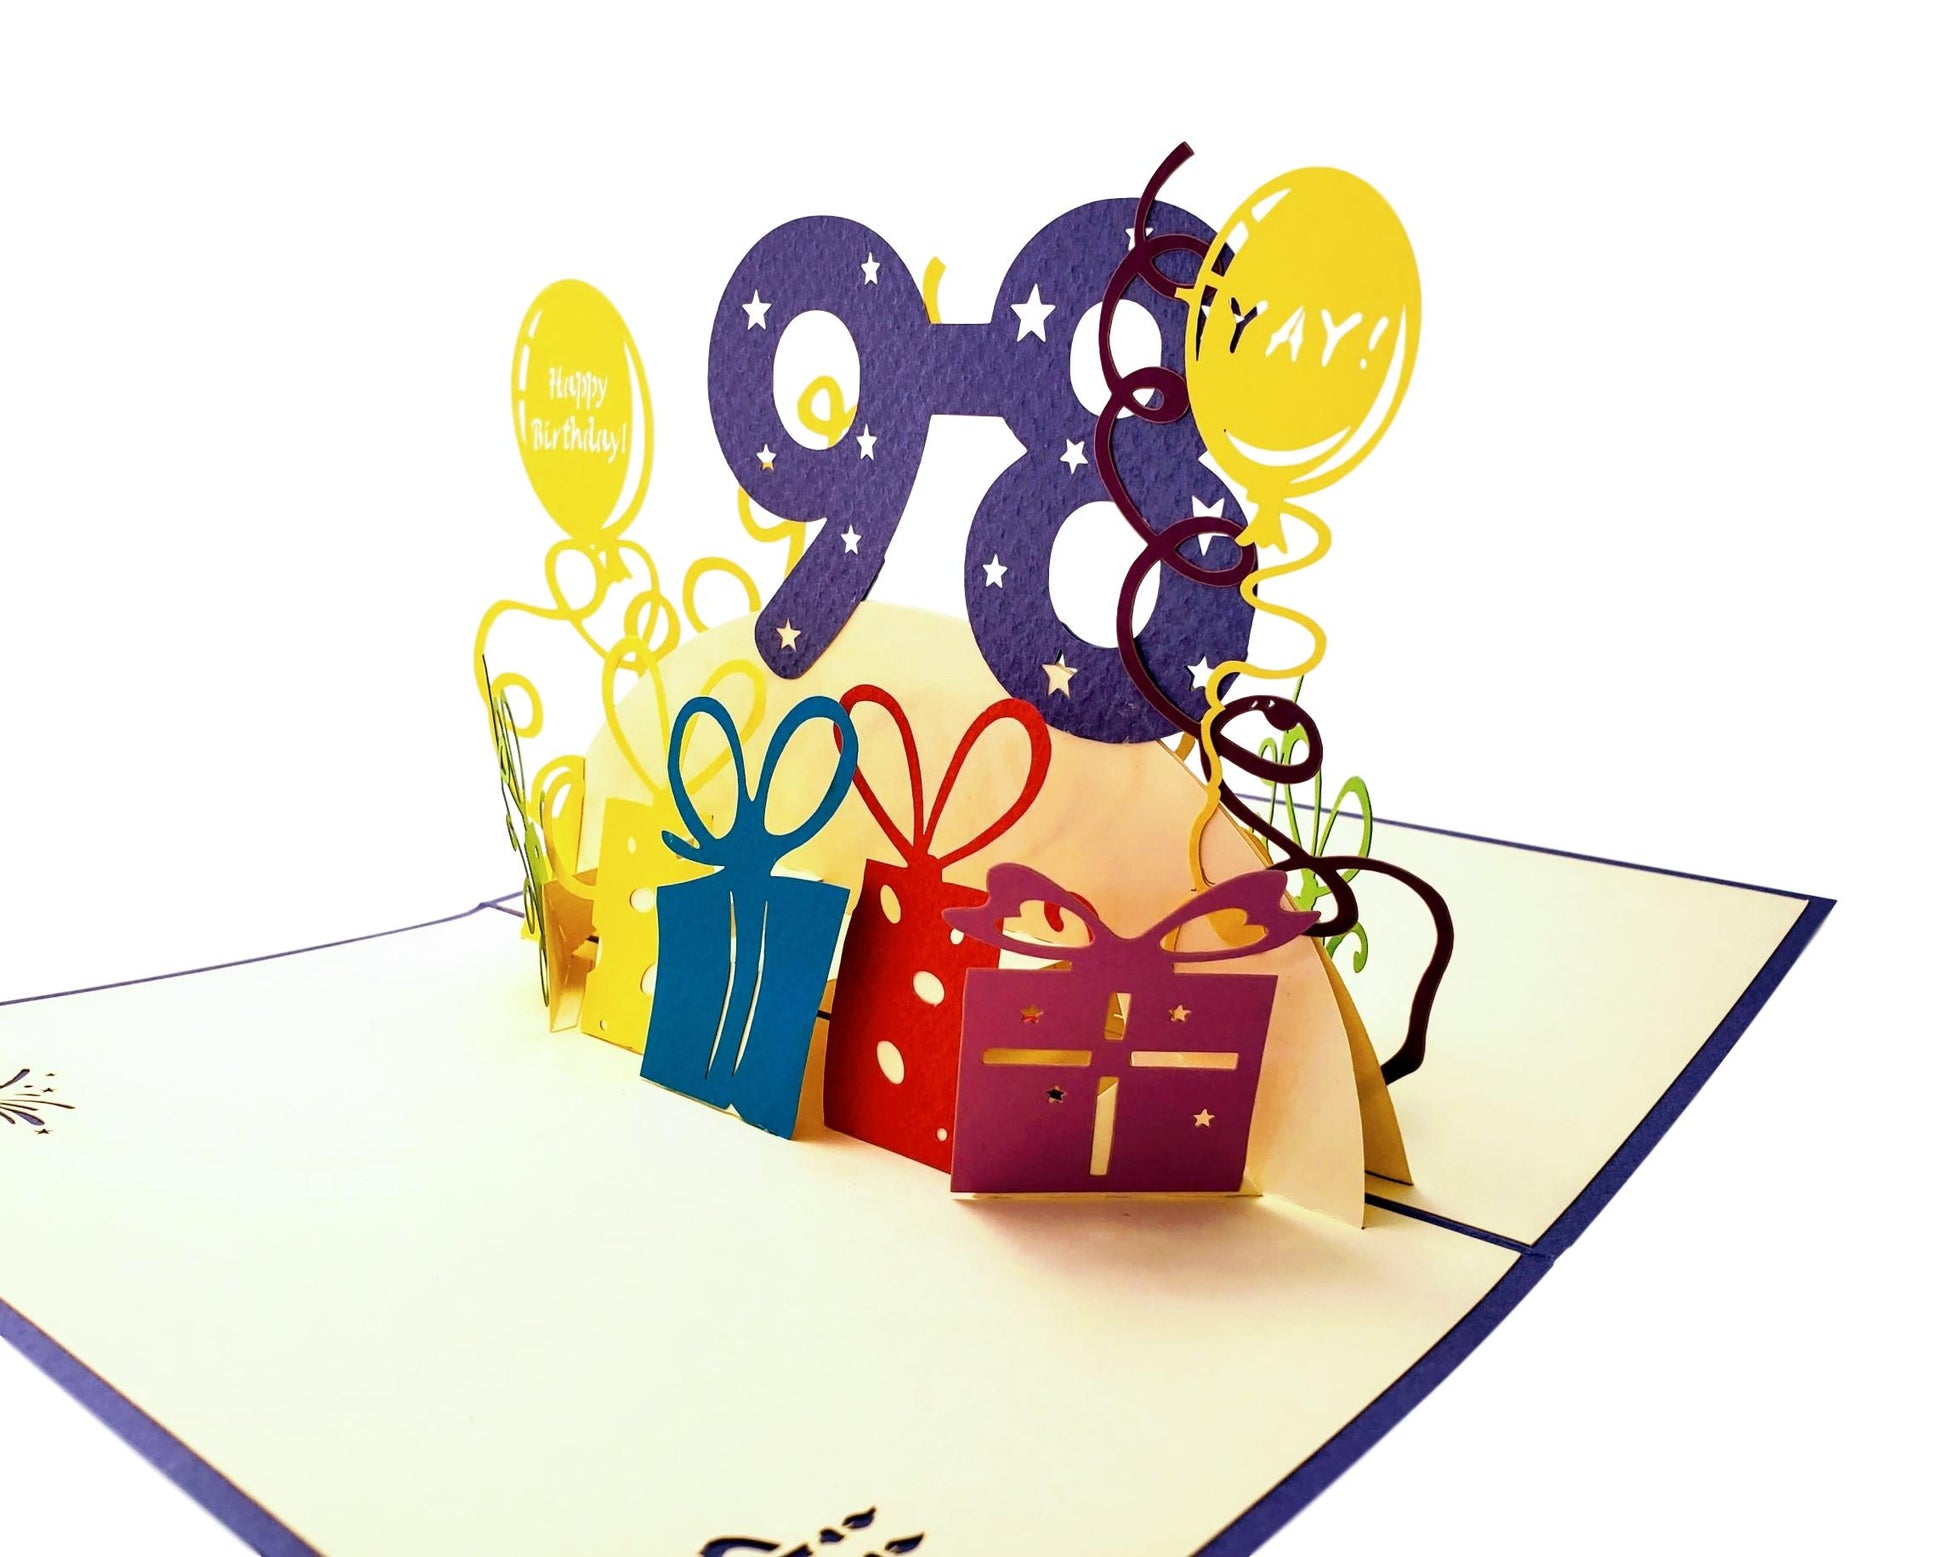 98th Birthday with Presents 3D Pop Up Greeting Card - Awesome - best wishes - Birthday - Celebration - iGifts And Cards